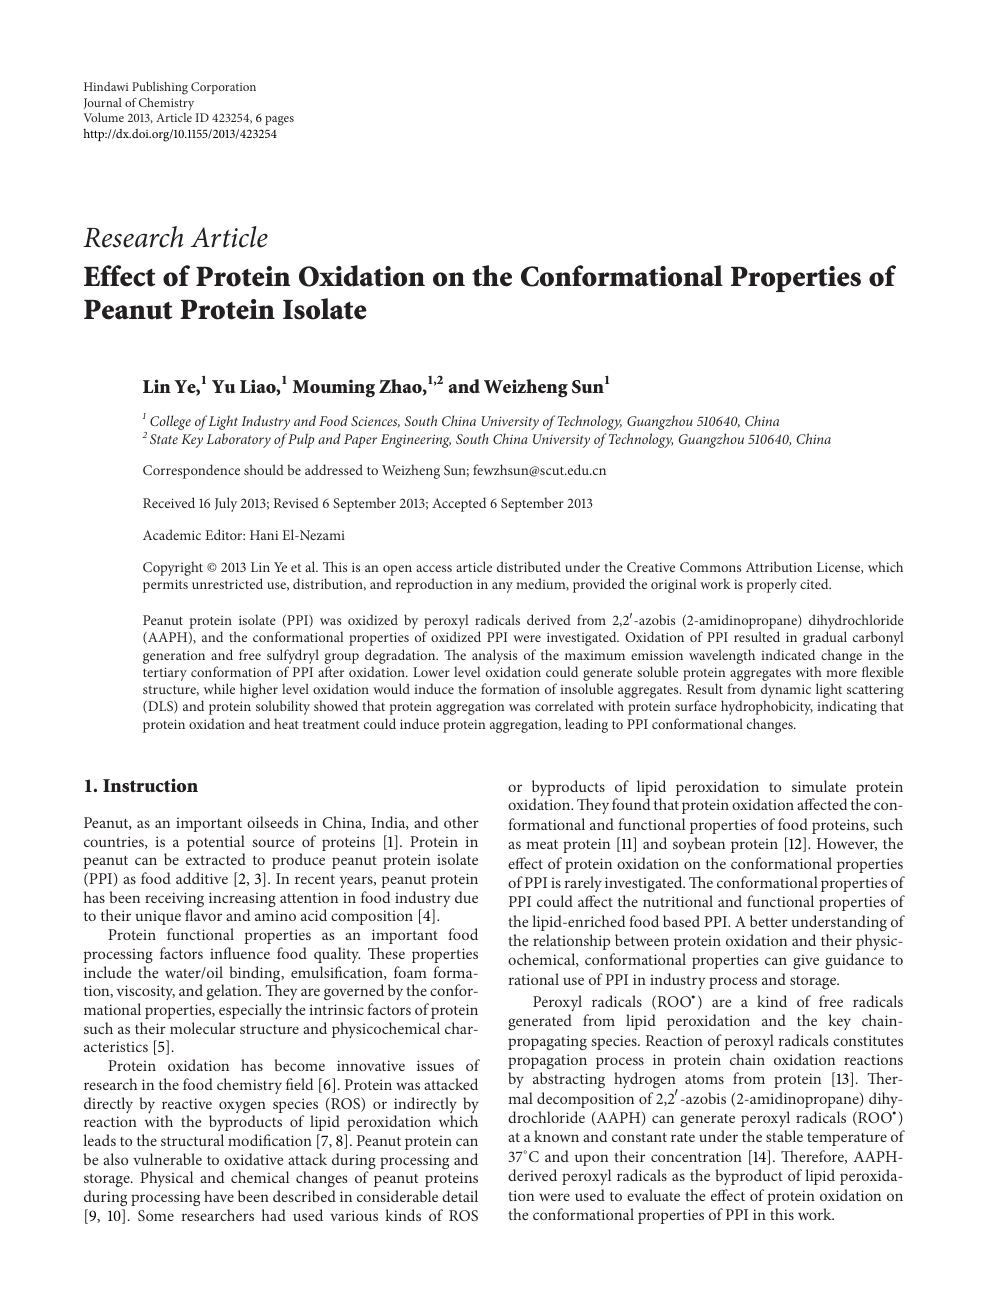 Effect Of Protein Oxidation On The Conformational Properties Of Peanut Protein Isolate Topic Of Research Paper In Chemical Sciences Download Scholarly Article Pdf And Read For Free On Cyberleninka Open Science